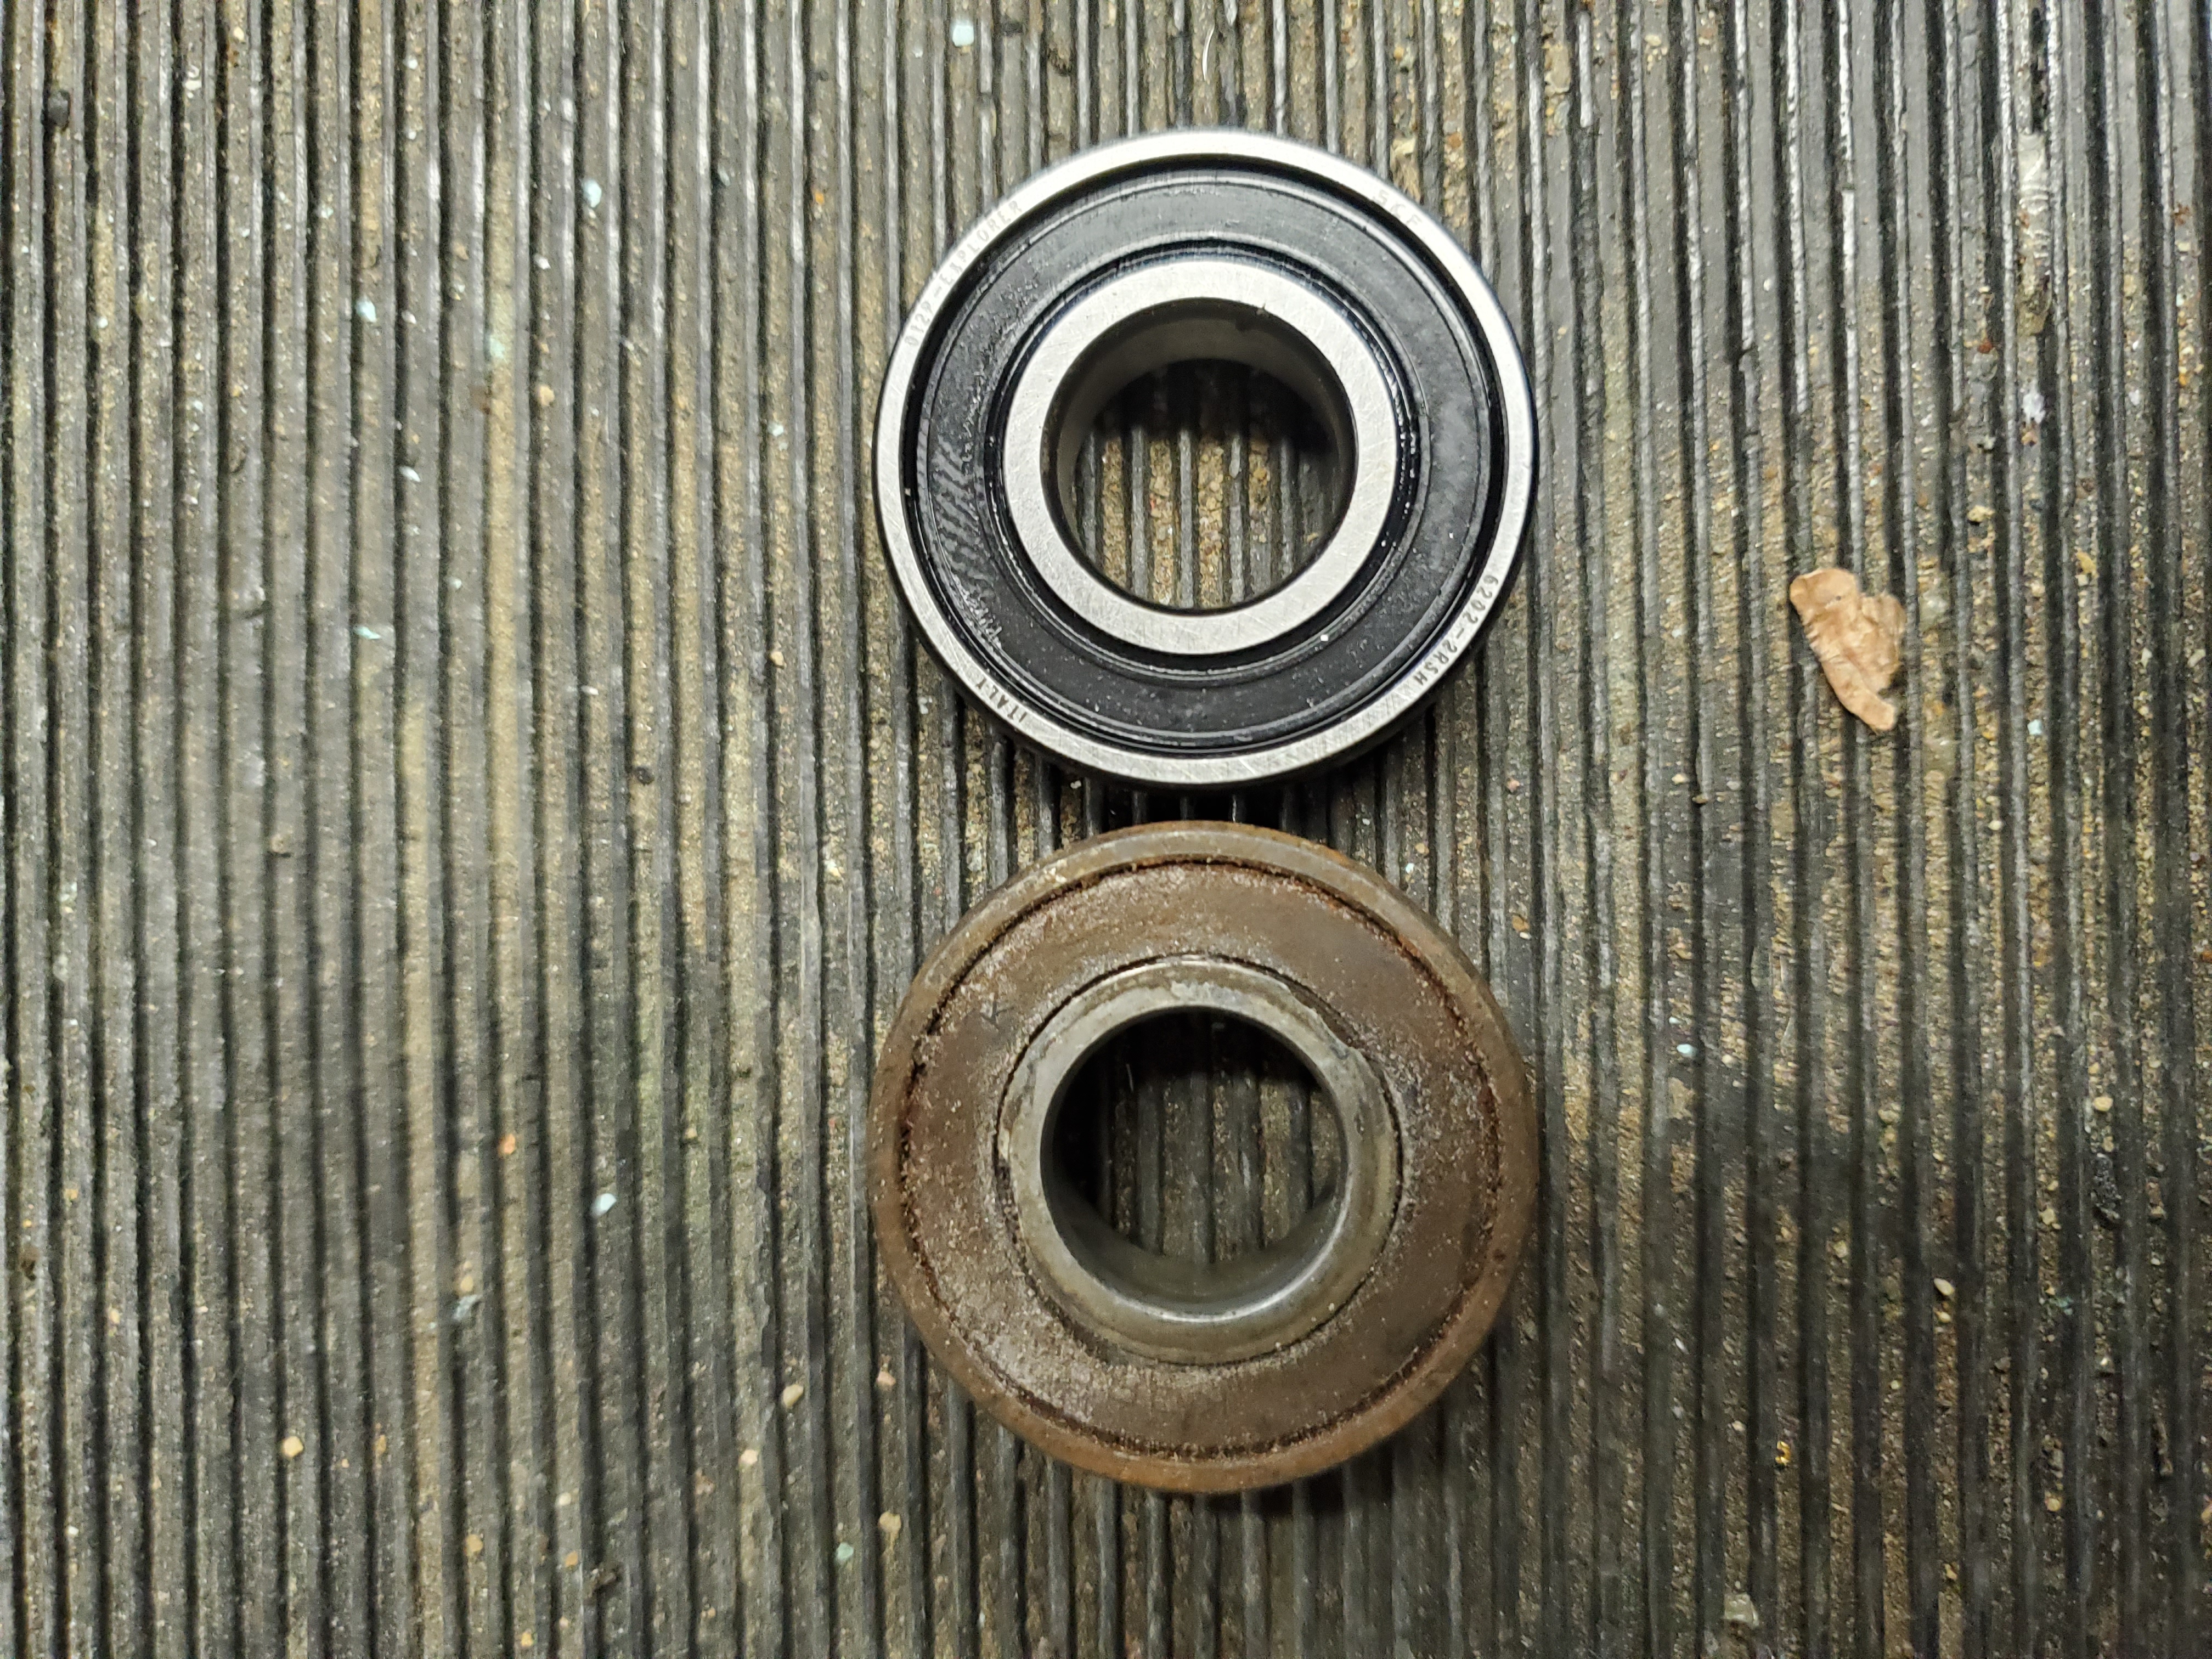 Lets not even get started on how hard bearing replacement was